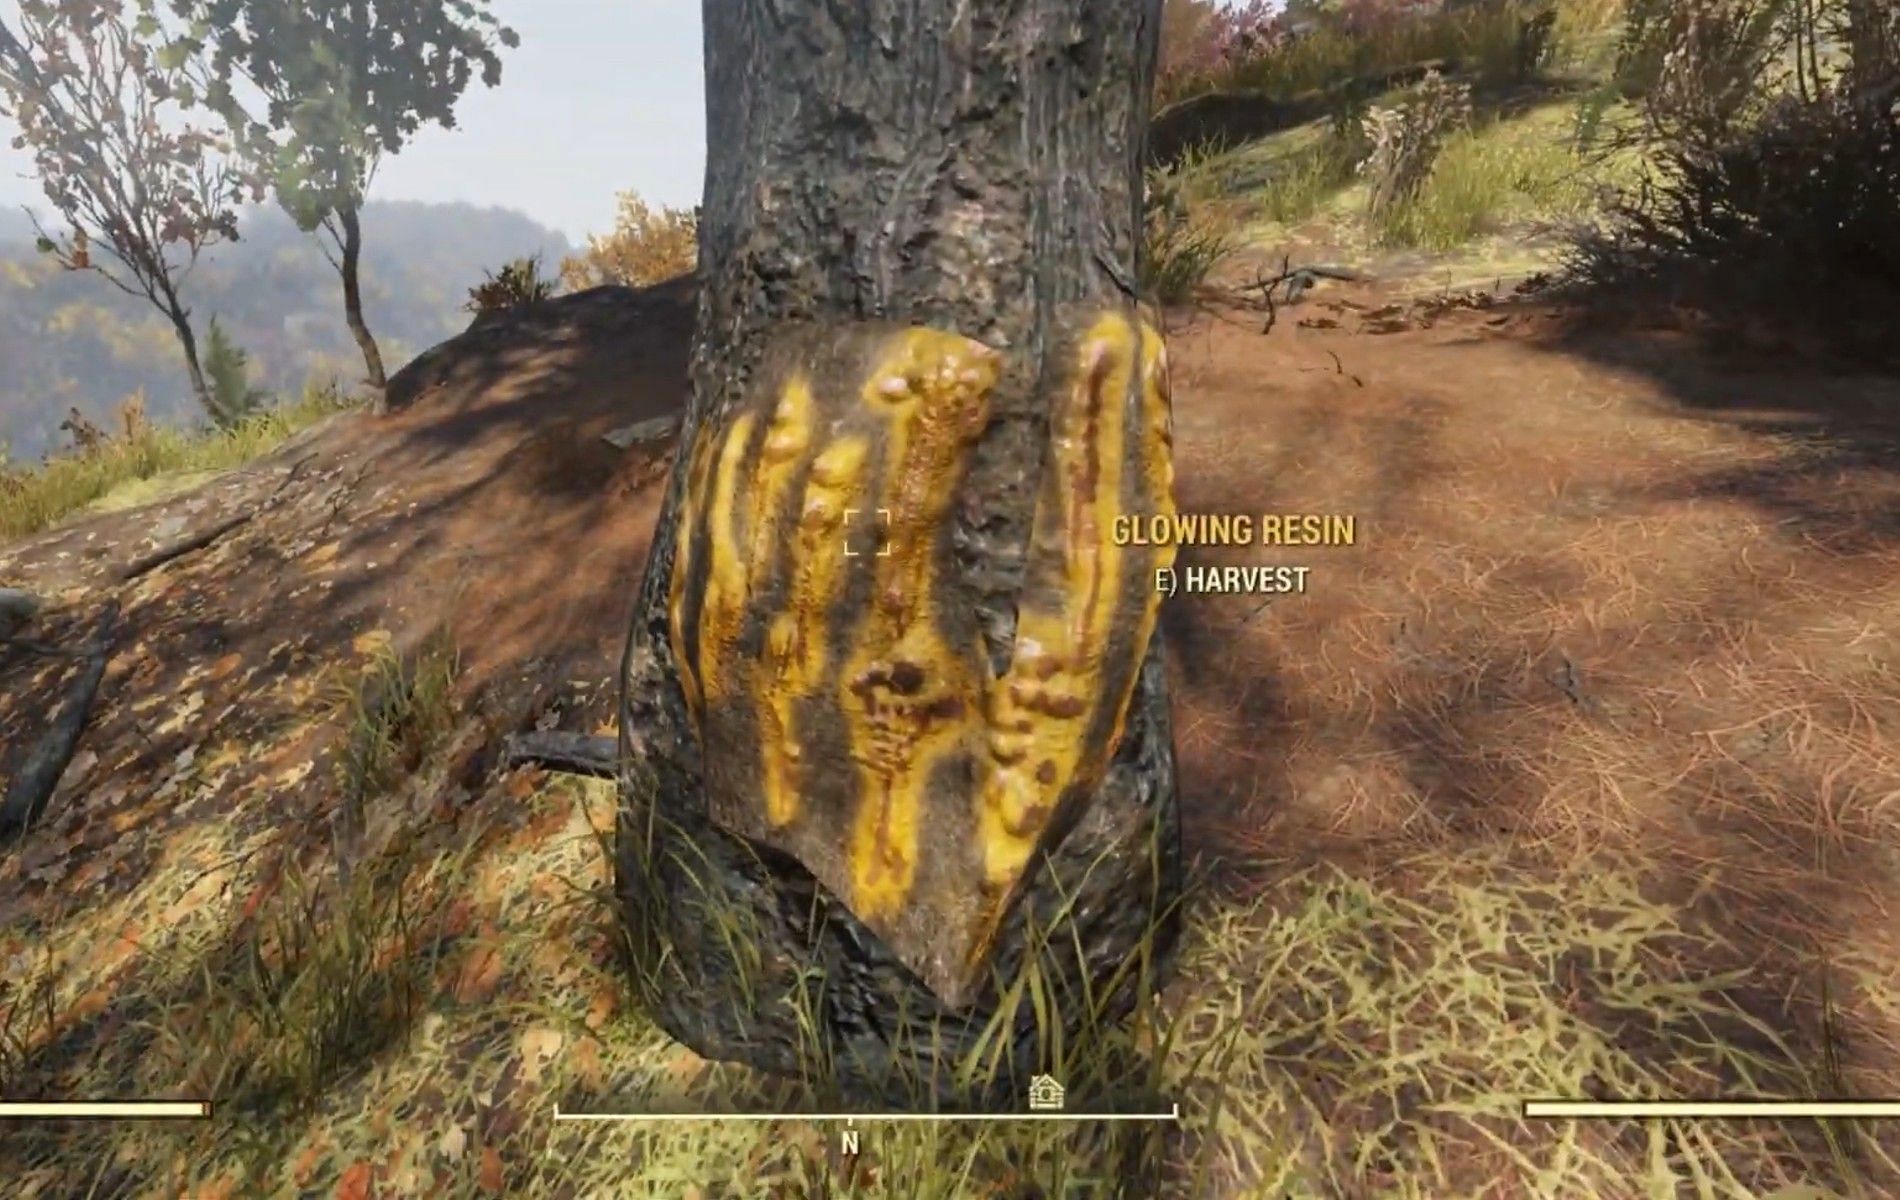 Collect the resin from the sides of trees in the area. (Image via YouTube/Wickedy)